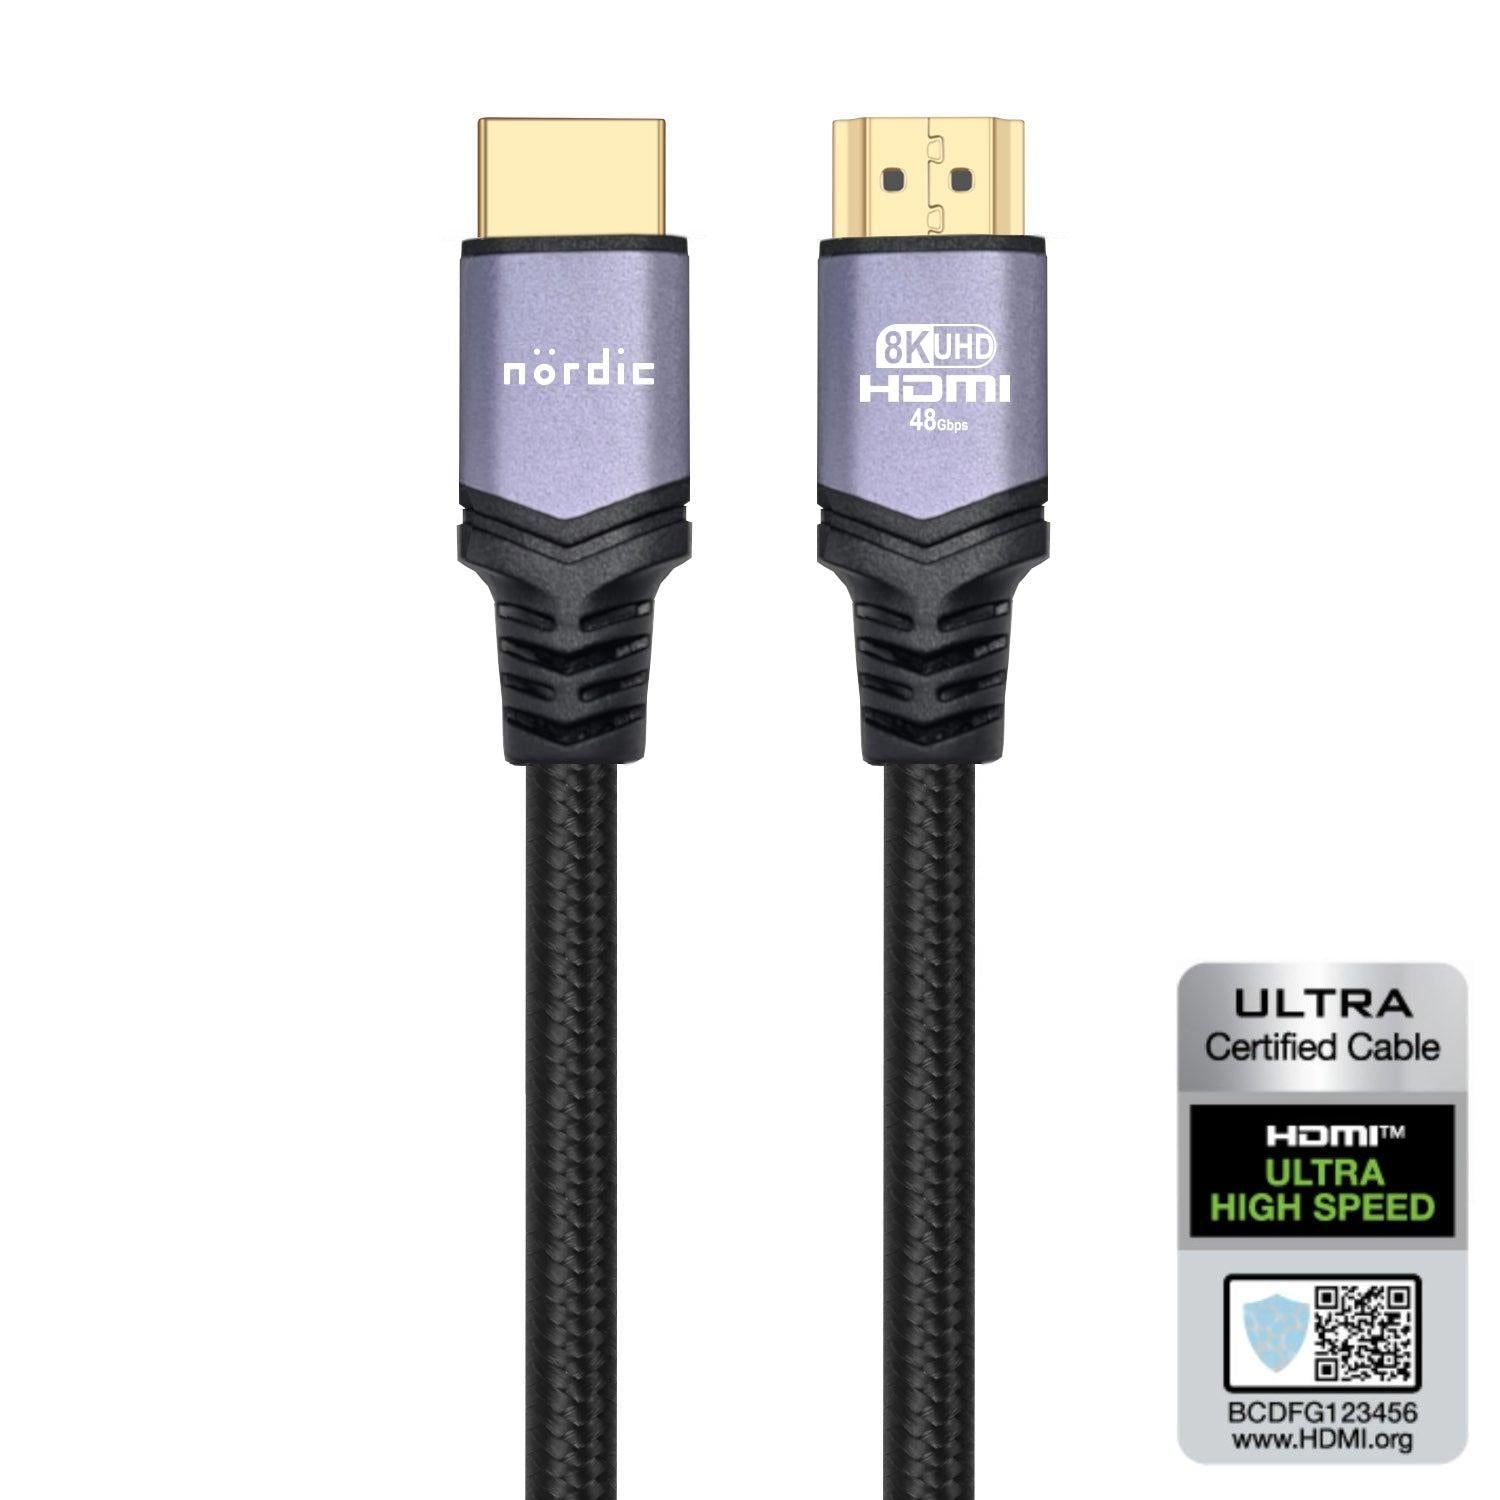 NÖRDIC CERTIFIED CABLES 15m Ultra High Speed HDMI 2.1 8K 60Hz 4K 120Hz 48Gbps Dynamic HDR eARC Game Mode VRR Dolby ATMOS Nylonflettet guldbelagt